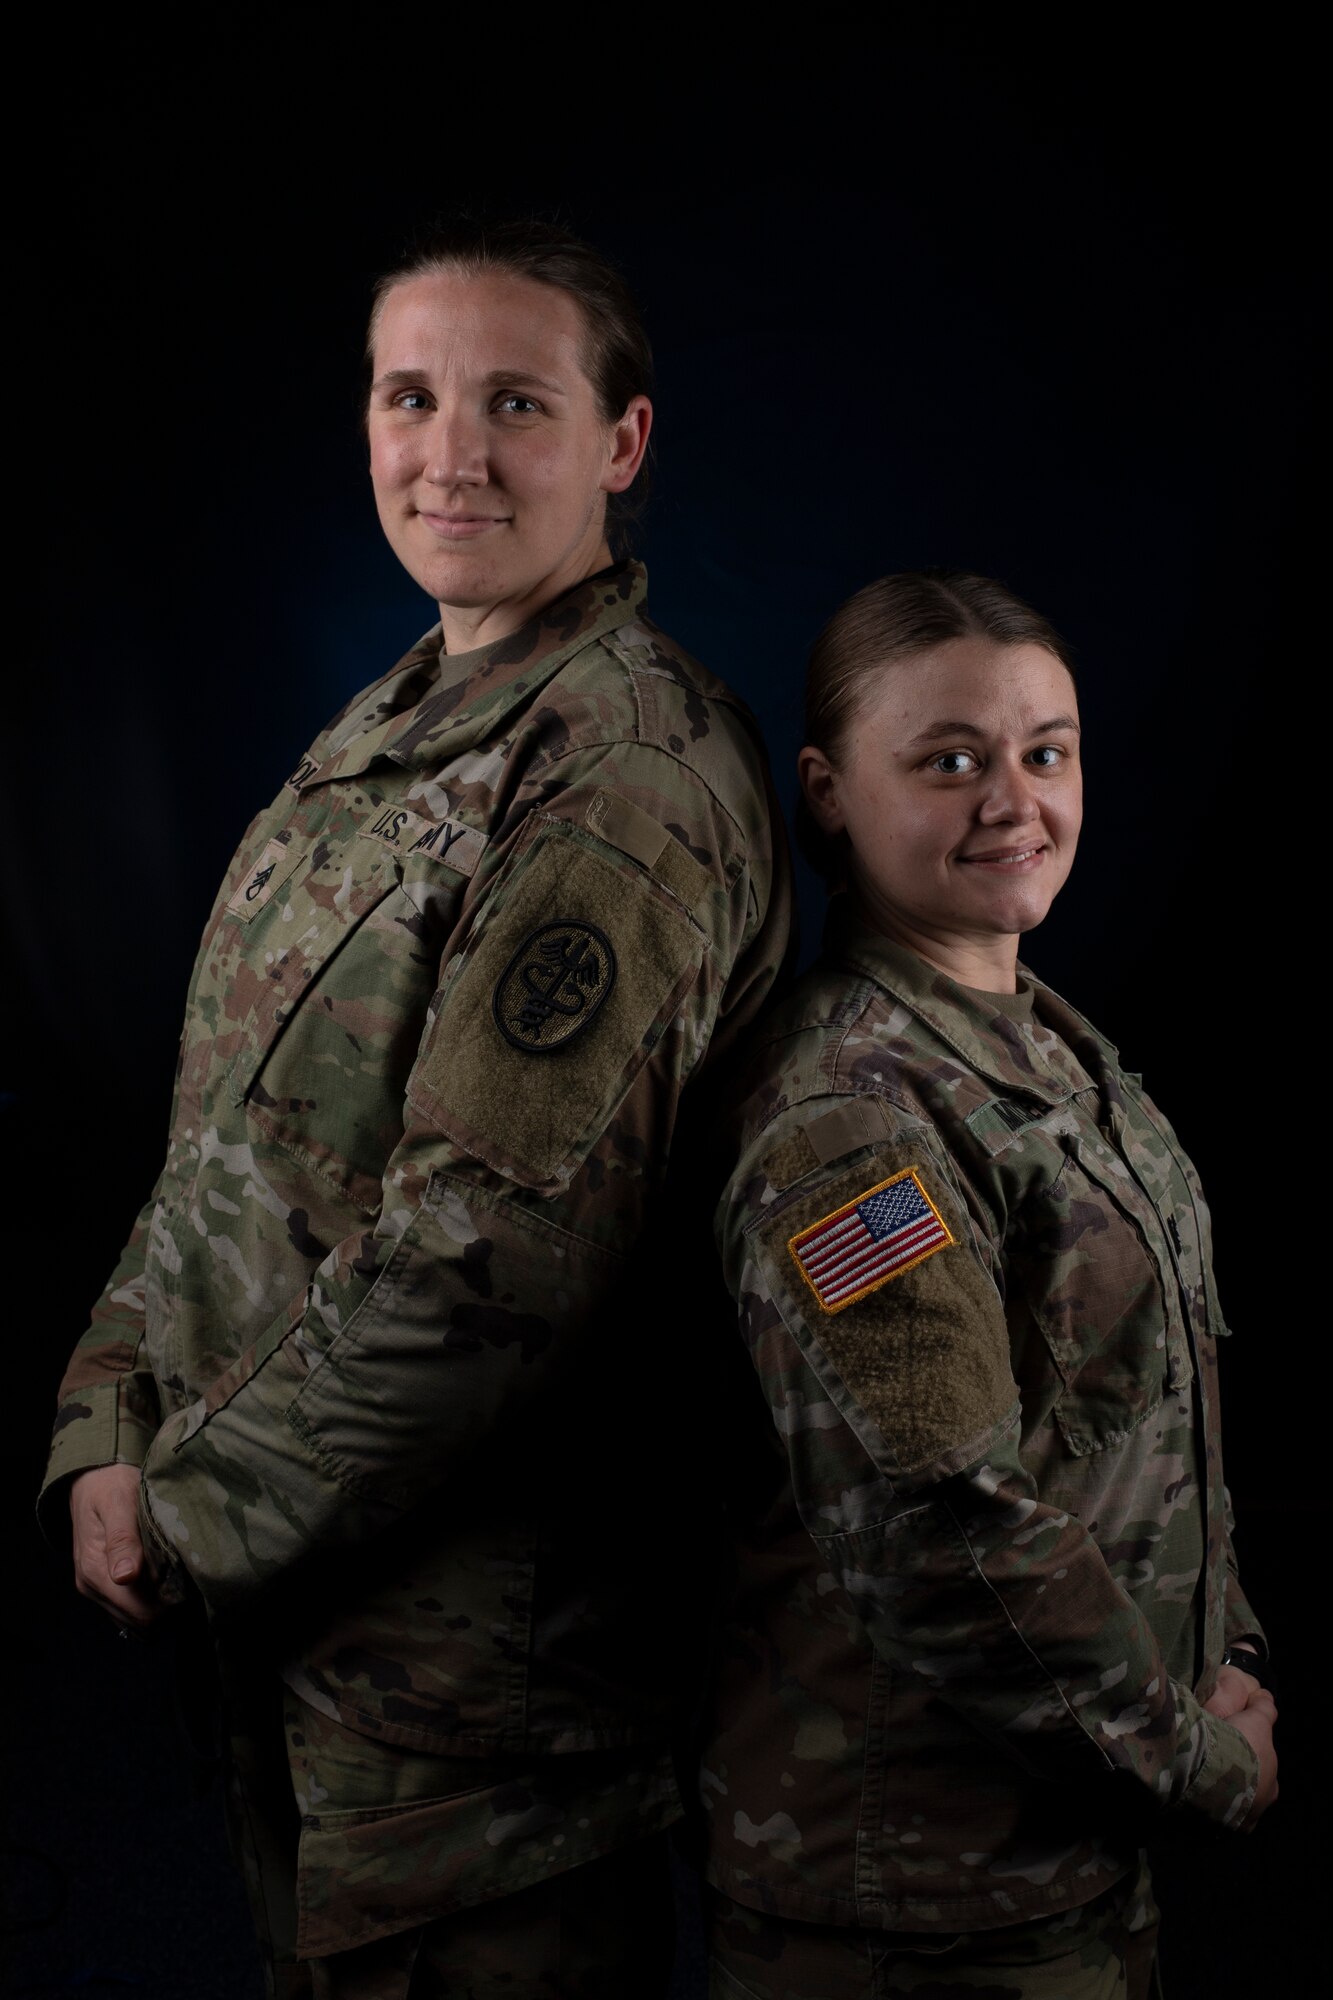 Two U.S. Army service women standing back to back